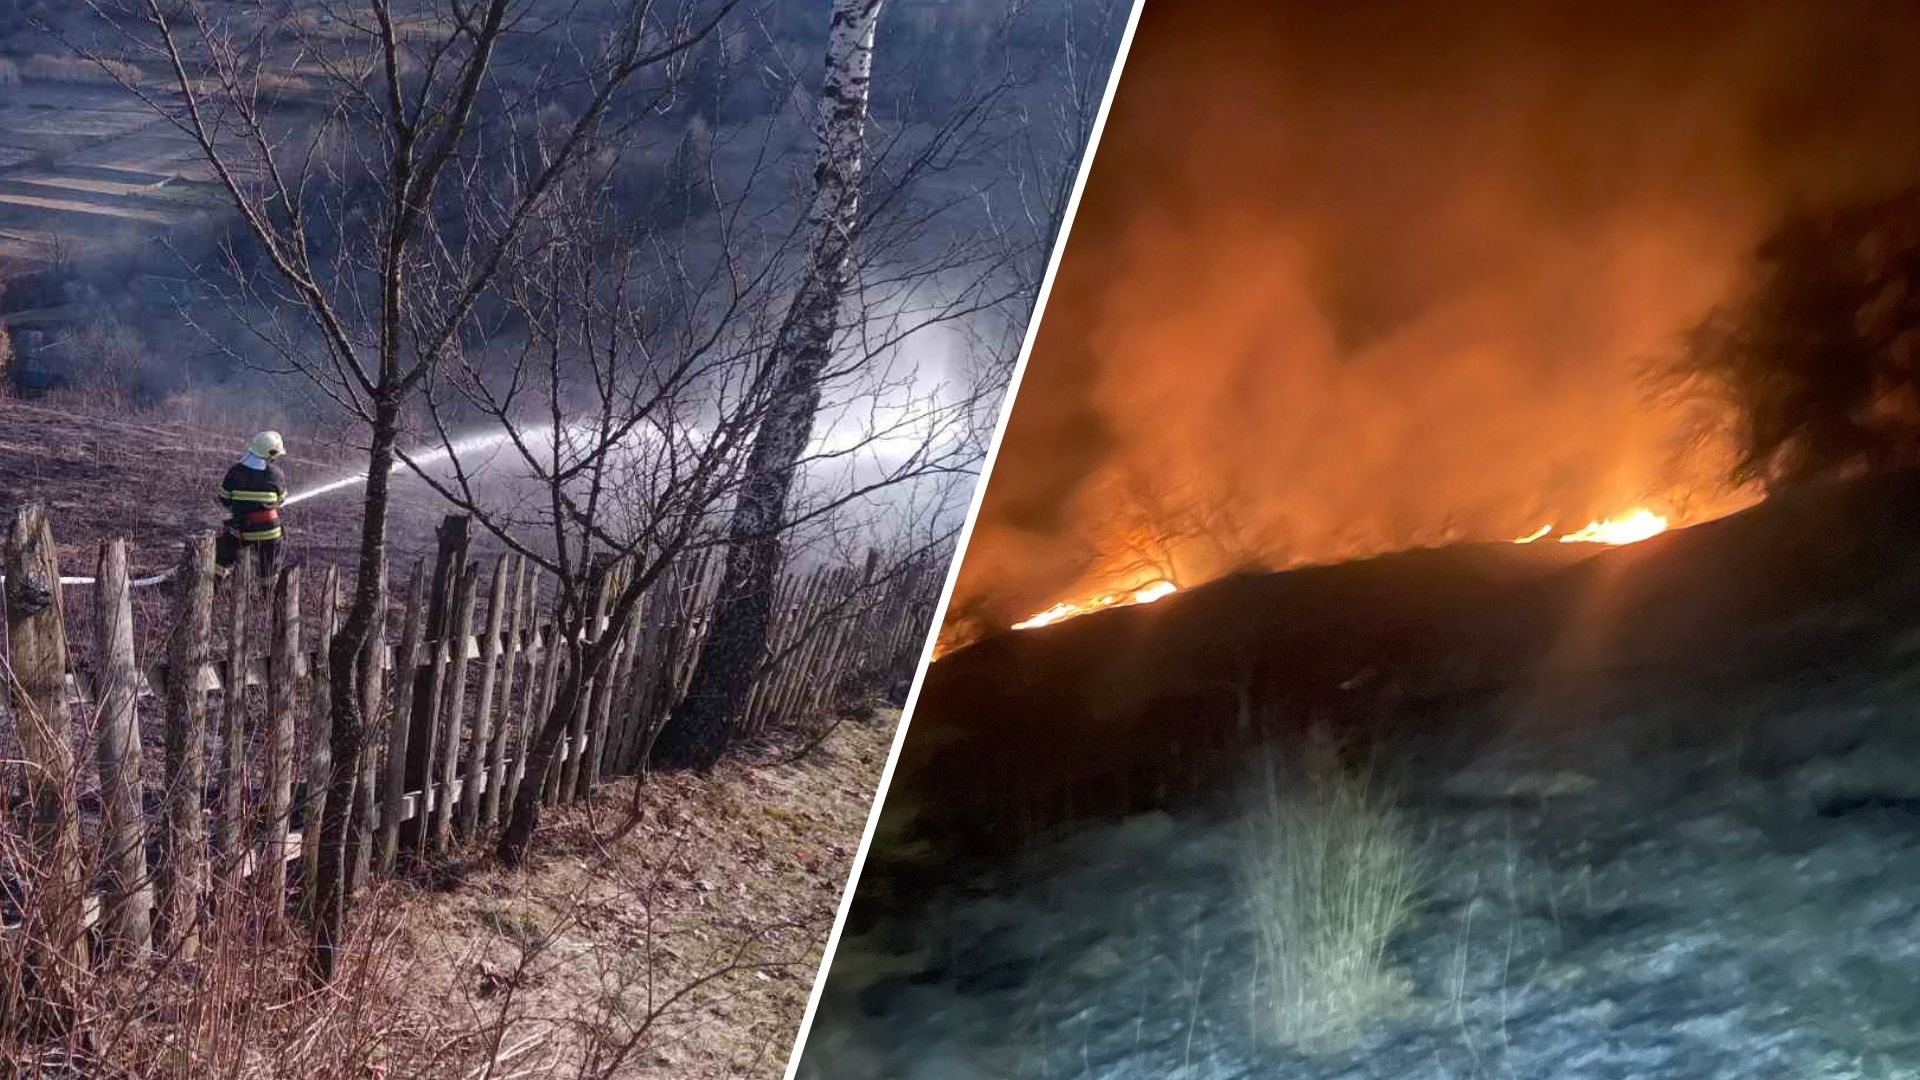 On this day, in all districts of Transcarpathia, with the exception of the Rakhiv region, bushes were burning and burning. As a result, the area of scorched earth increased by 6 hectares. In total, 13 fires were recorded in ecosystems, which is a percentage increase compared to the previous weekend.